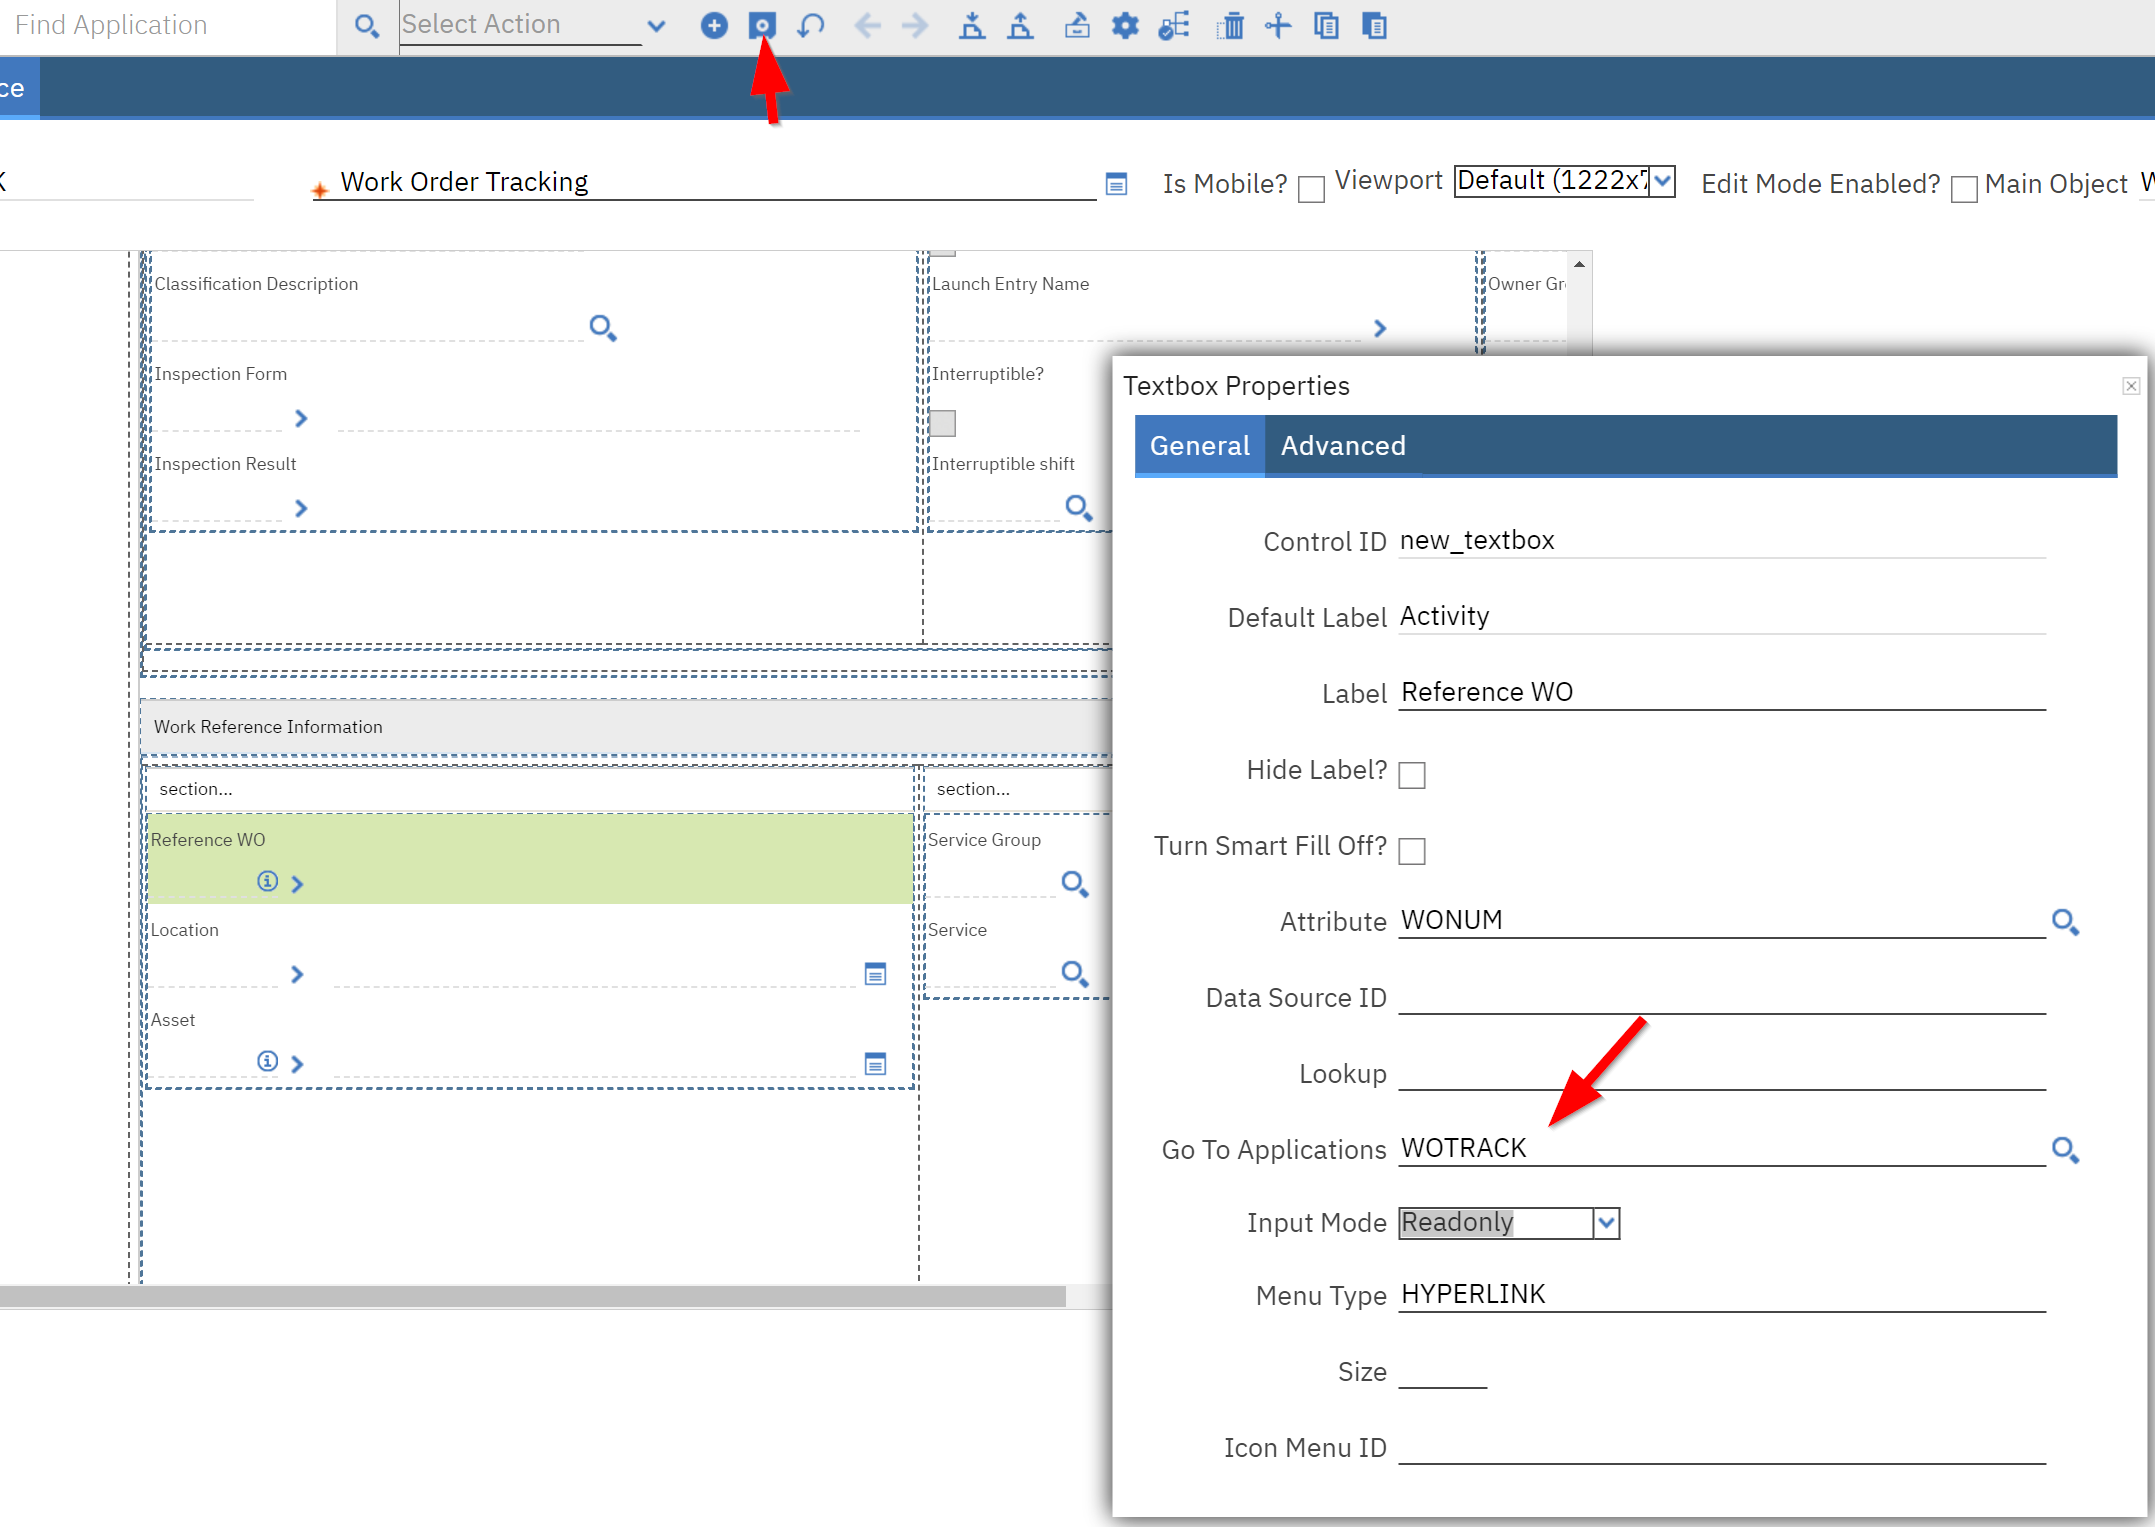 Work Order Tracking in IBM Maximo 